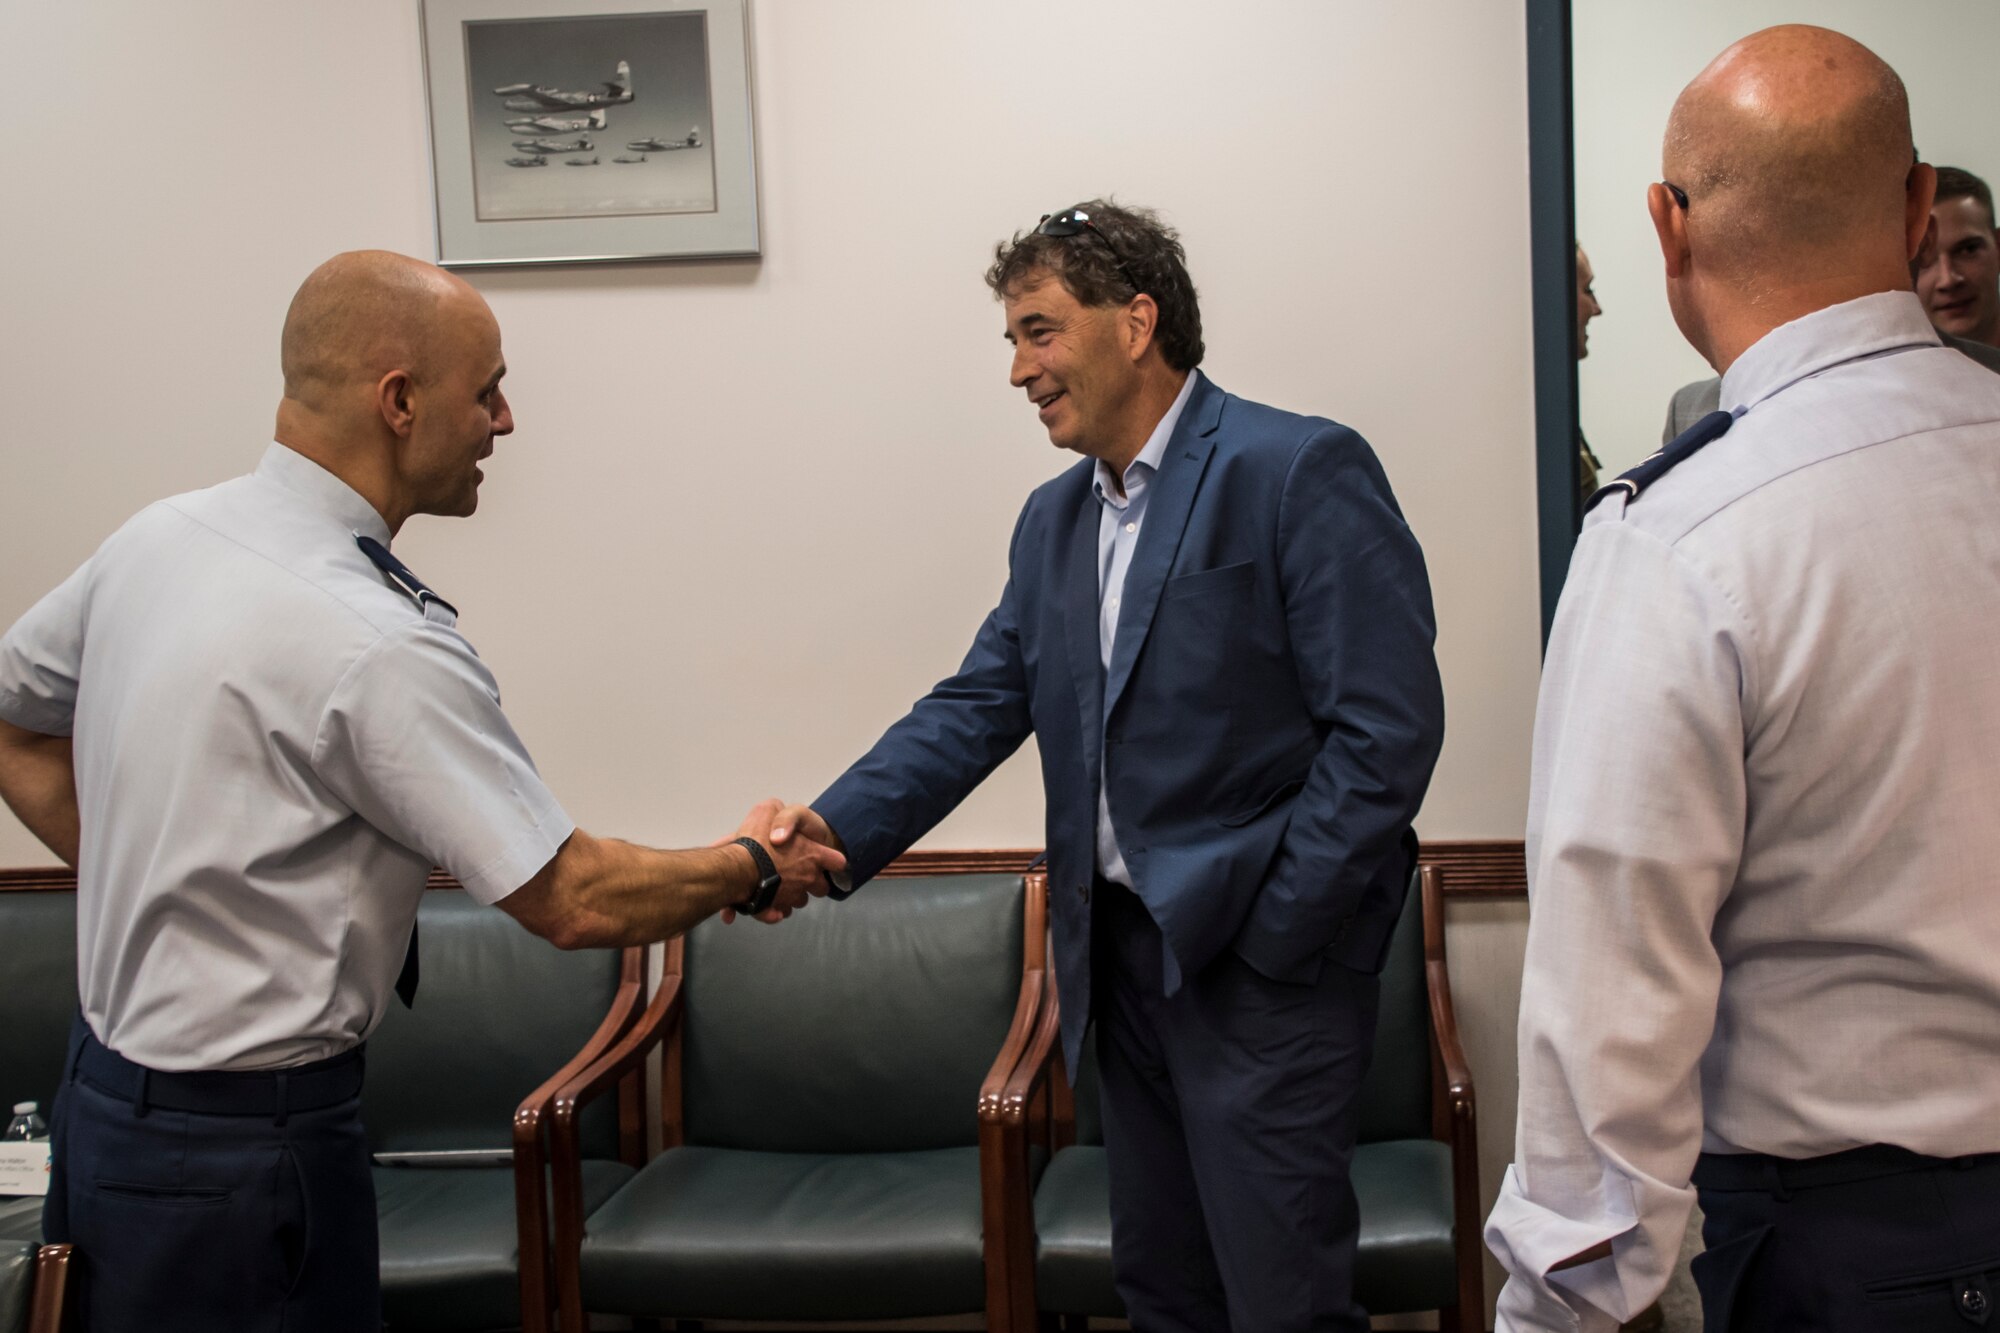 Photo of military member shaking hands with U.S. Representative from Ohio